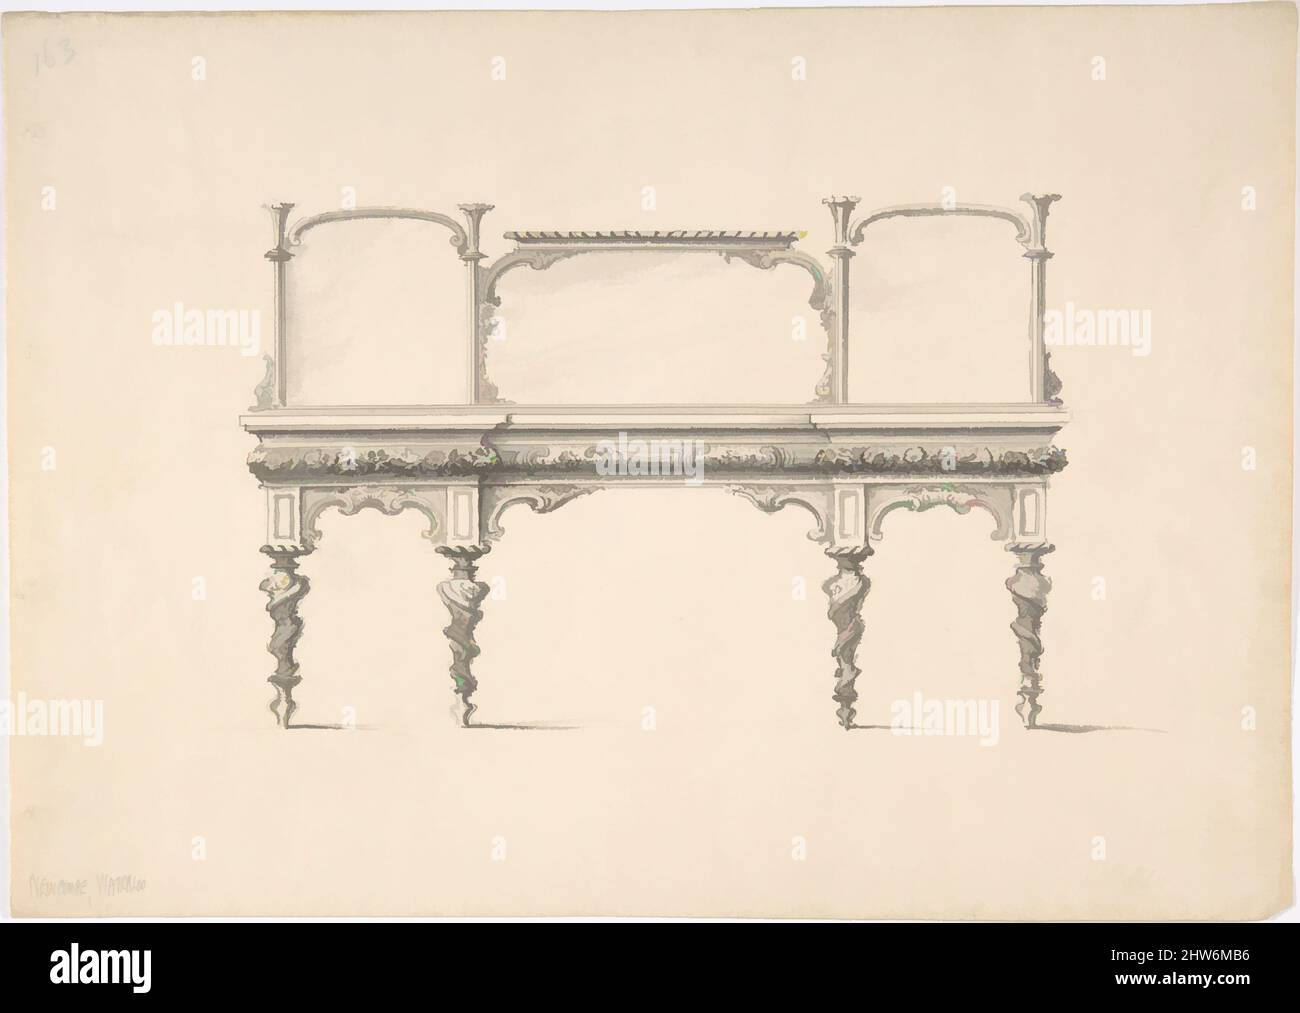 Art inspired by Design for a Sideboard with Mirrors and Turned Legs, early 19th century, Ink and wash, sheet: 8 3/4 x 12 3/16 in. (22.2 x 31 cm), Anonymous, British, 19th century, Classic works modernized by Artotop with a splash of modernity. Shapes, color and value, eye-catching visual impact on art. Emotions through freedom of artworks in a contemporary way. A timeless message pursuing a wildly creative new direction. Artists turning to the digital medium and creating the Artotop NFT Stock Photo